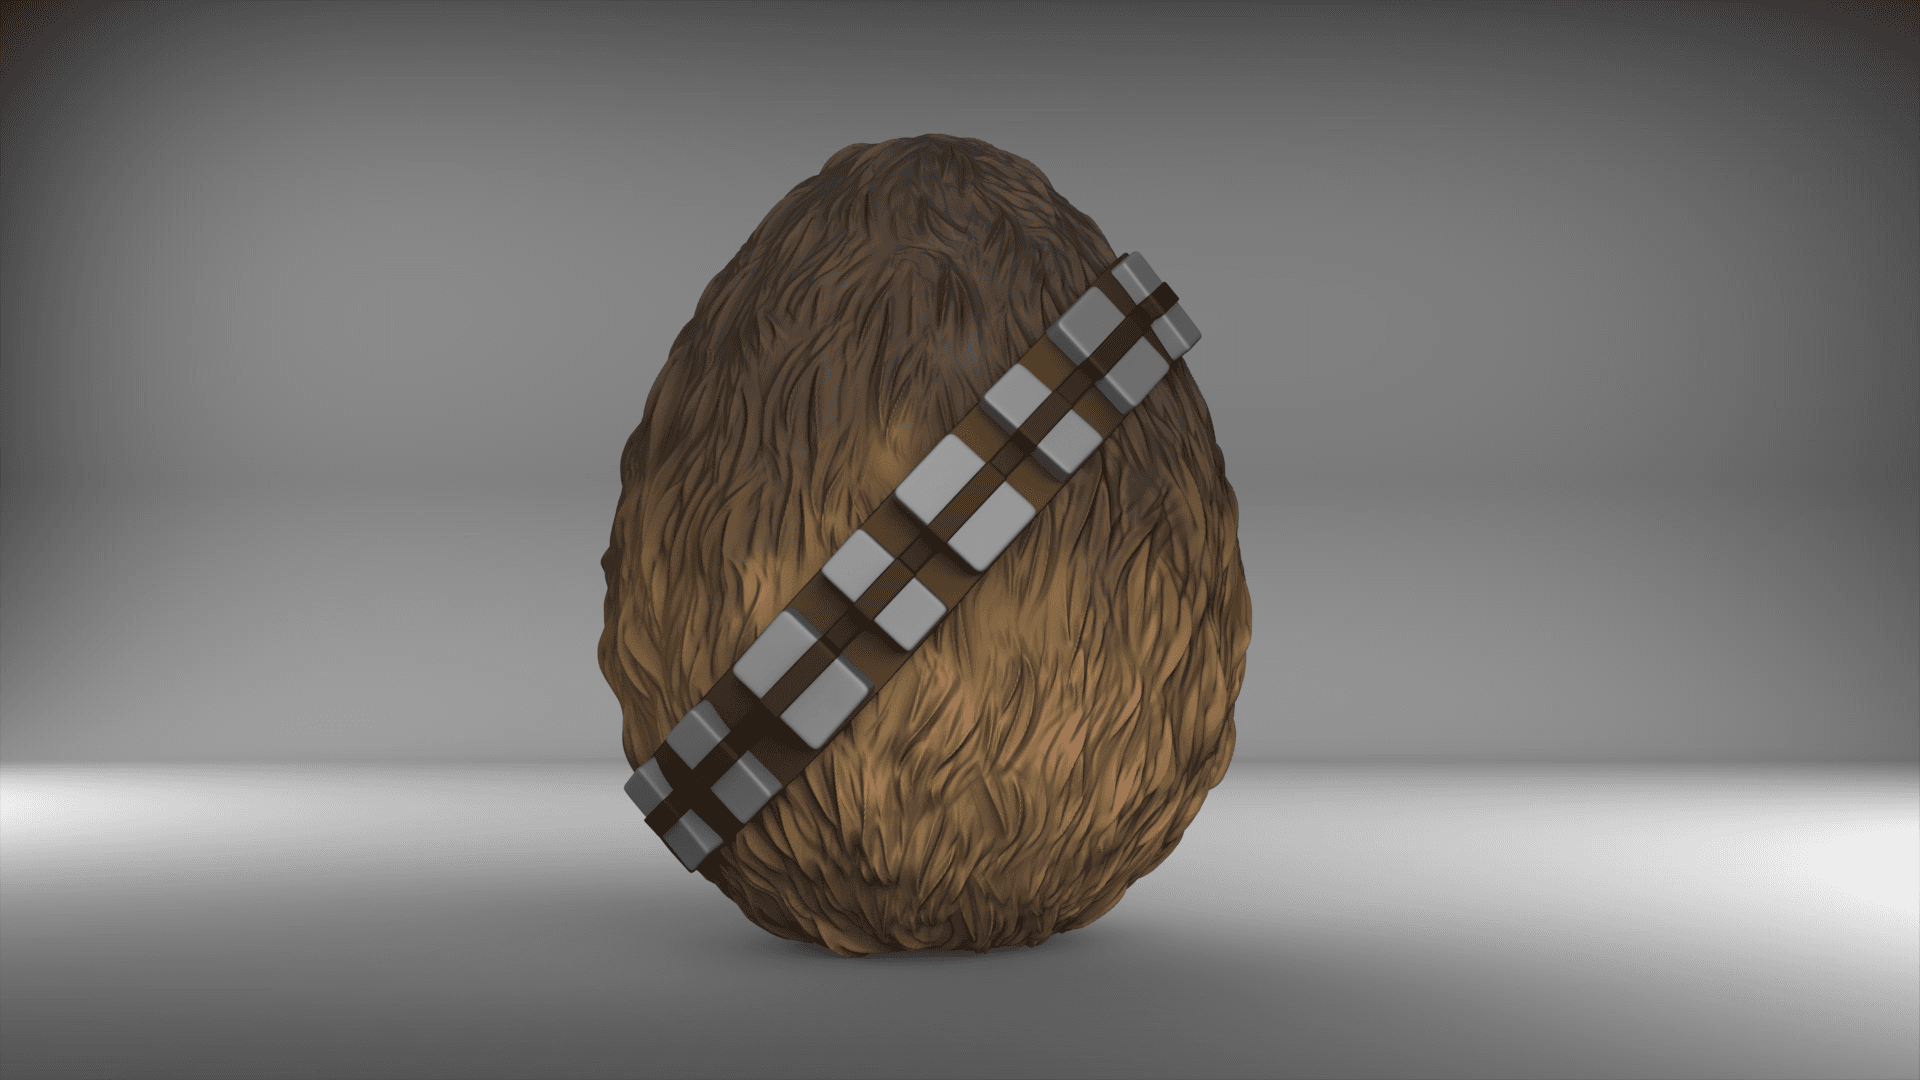 Chewbacca Egg Container 3d model